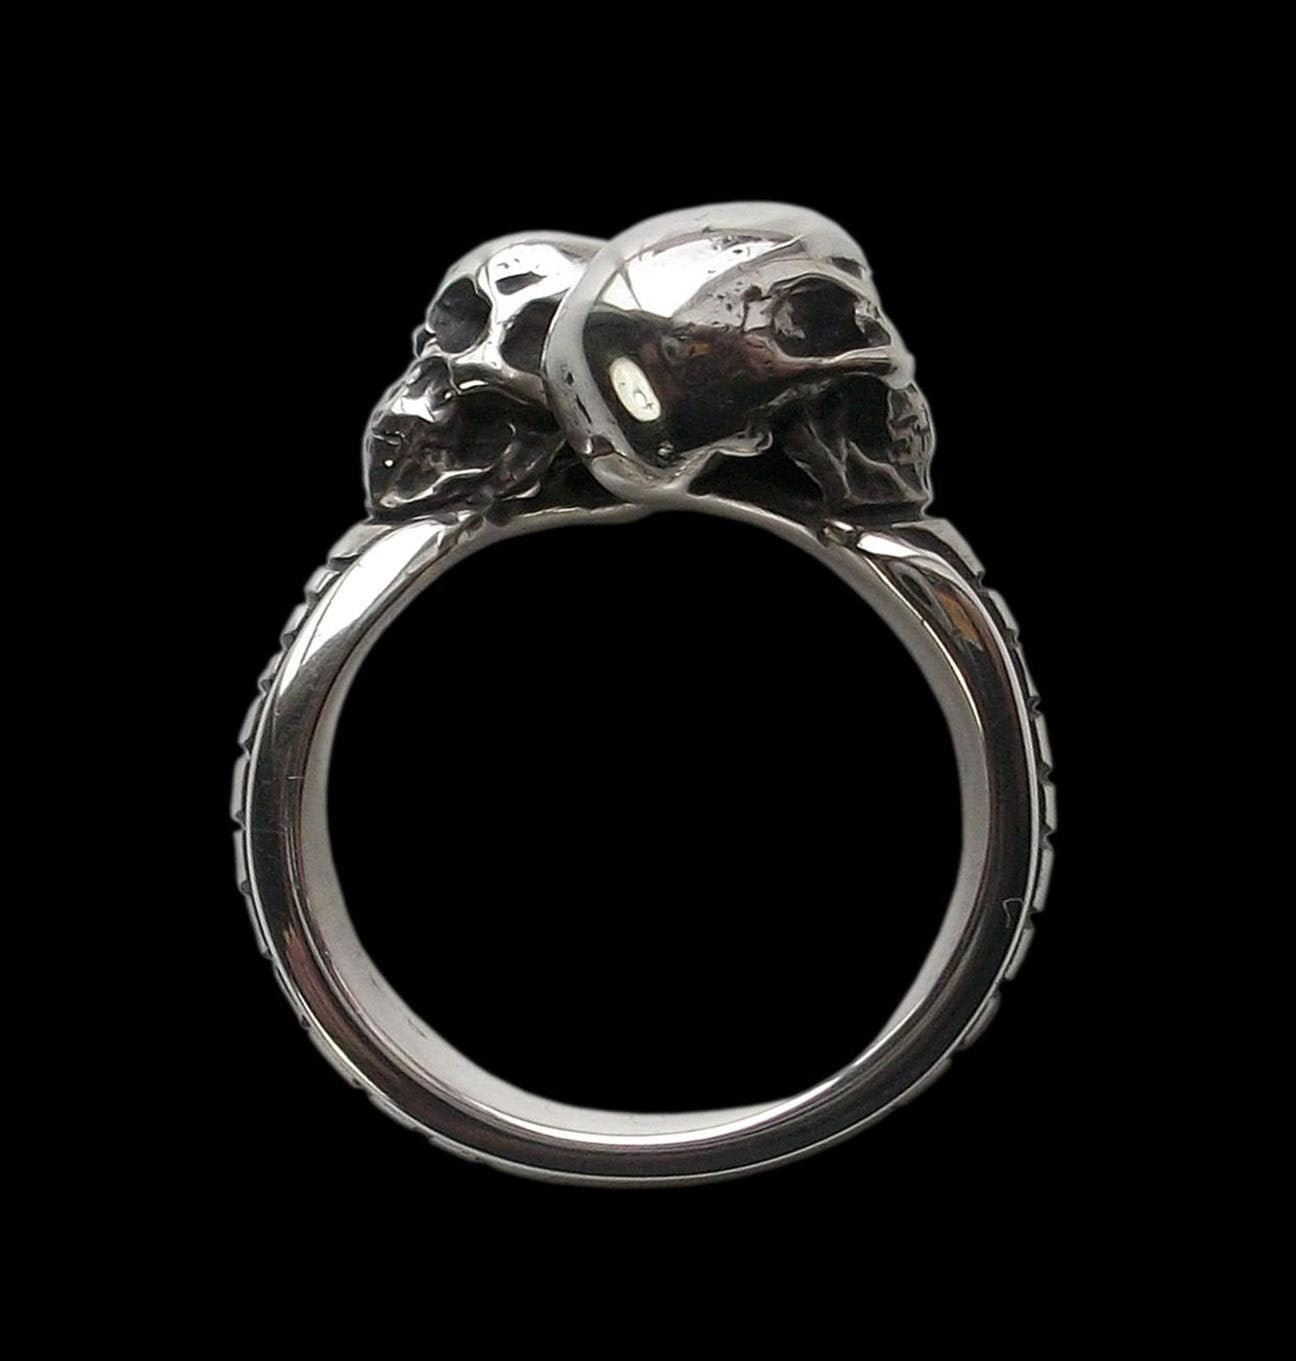 Skull engagement ring - Sterling Silver Eternal Love Engagement Skull Ring - Love to Death Ring - Inspired by Lovers Of Valdaro - ALL SIZES